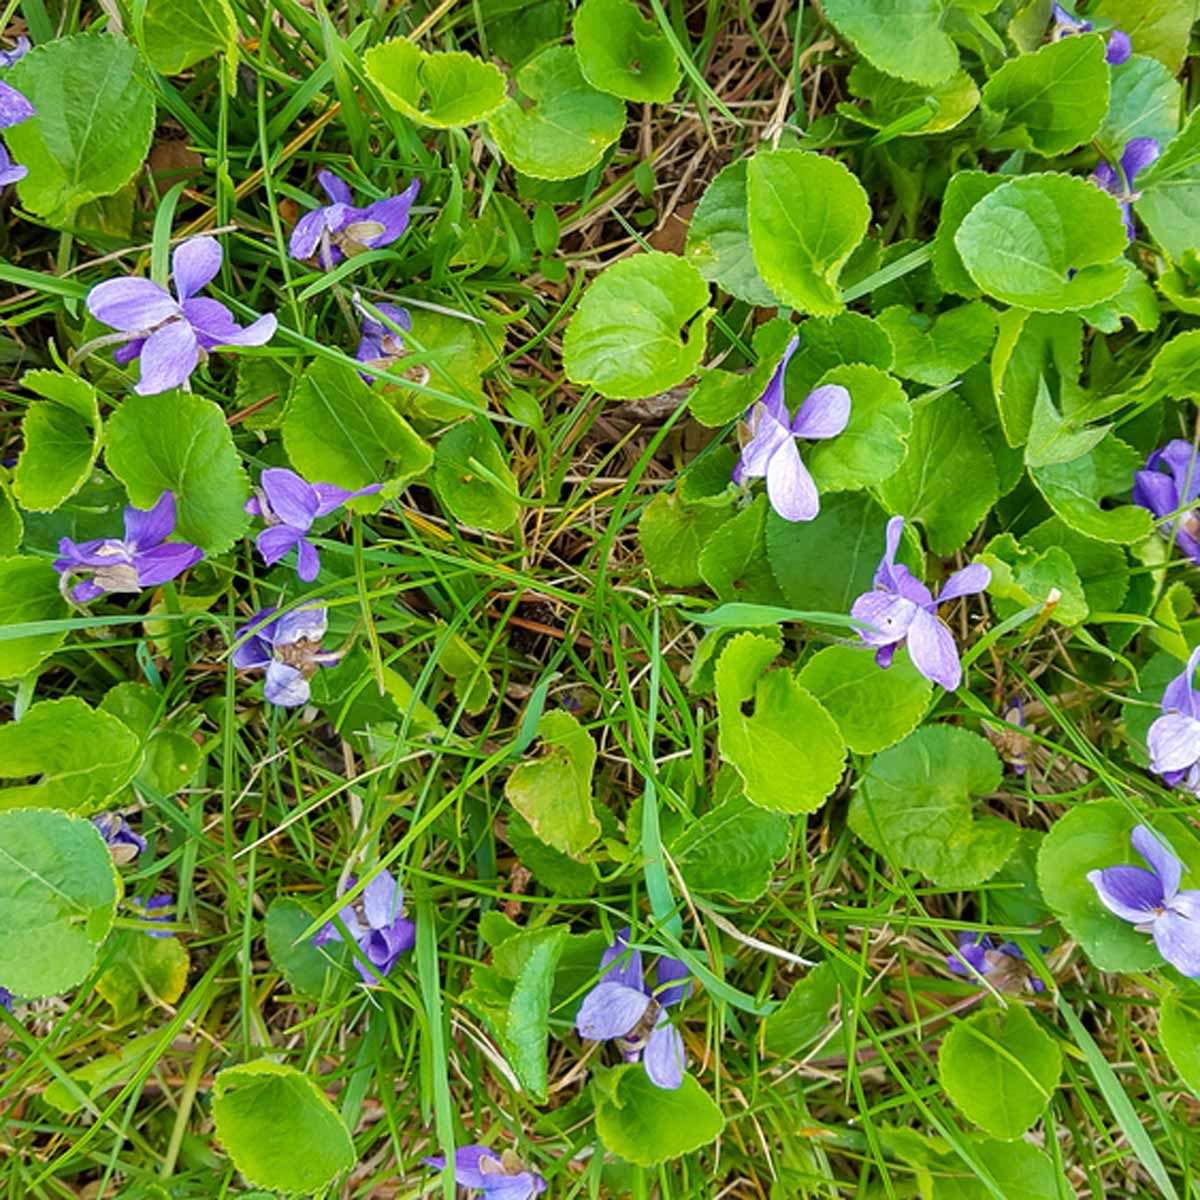 12 Plants In Your Yard That May Be Dangerous